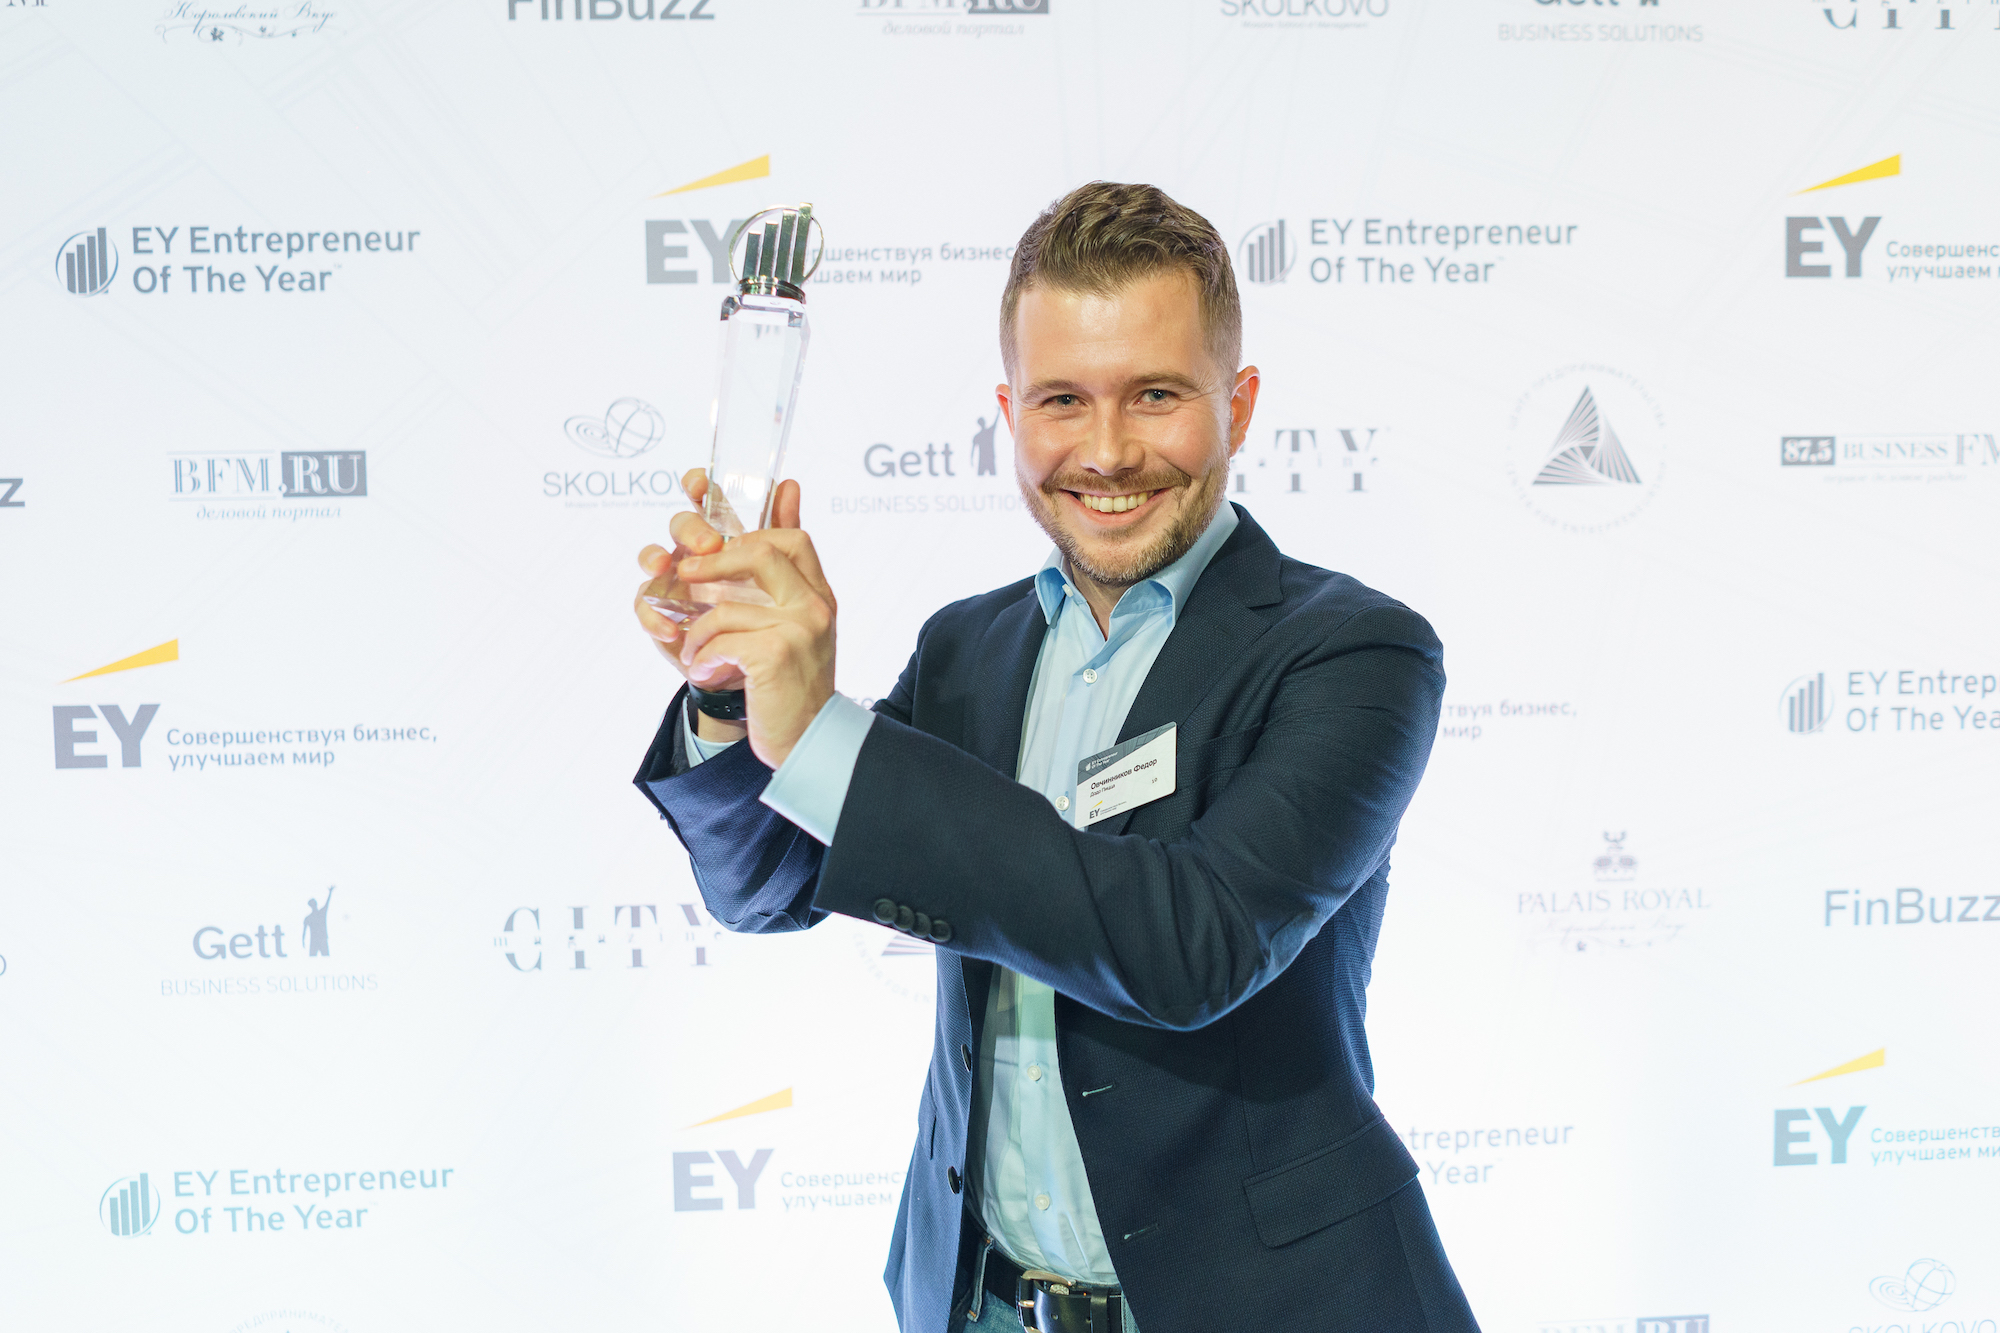 Ernst & Young Russia Entrepreneur of the Year Award